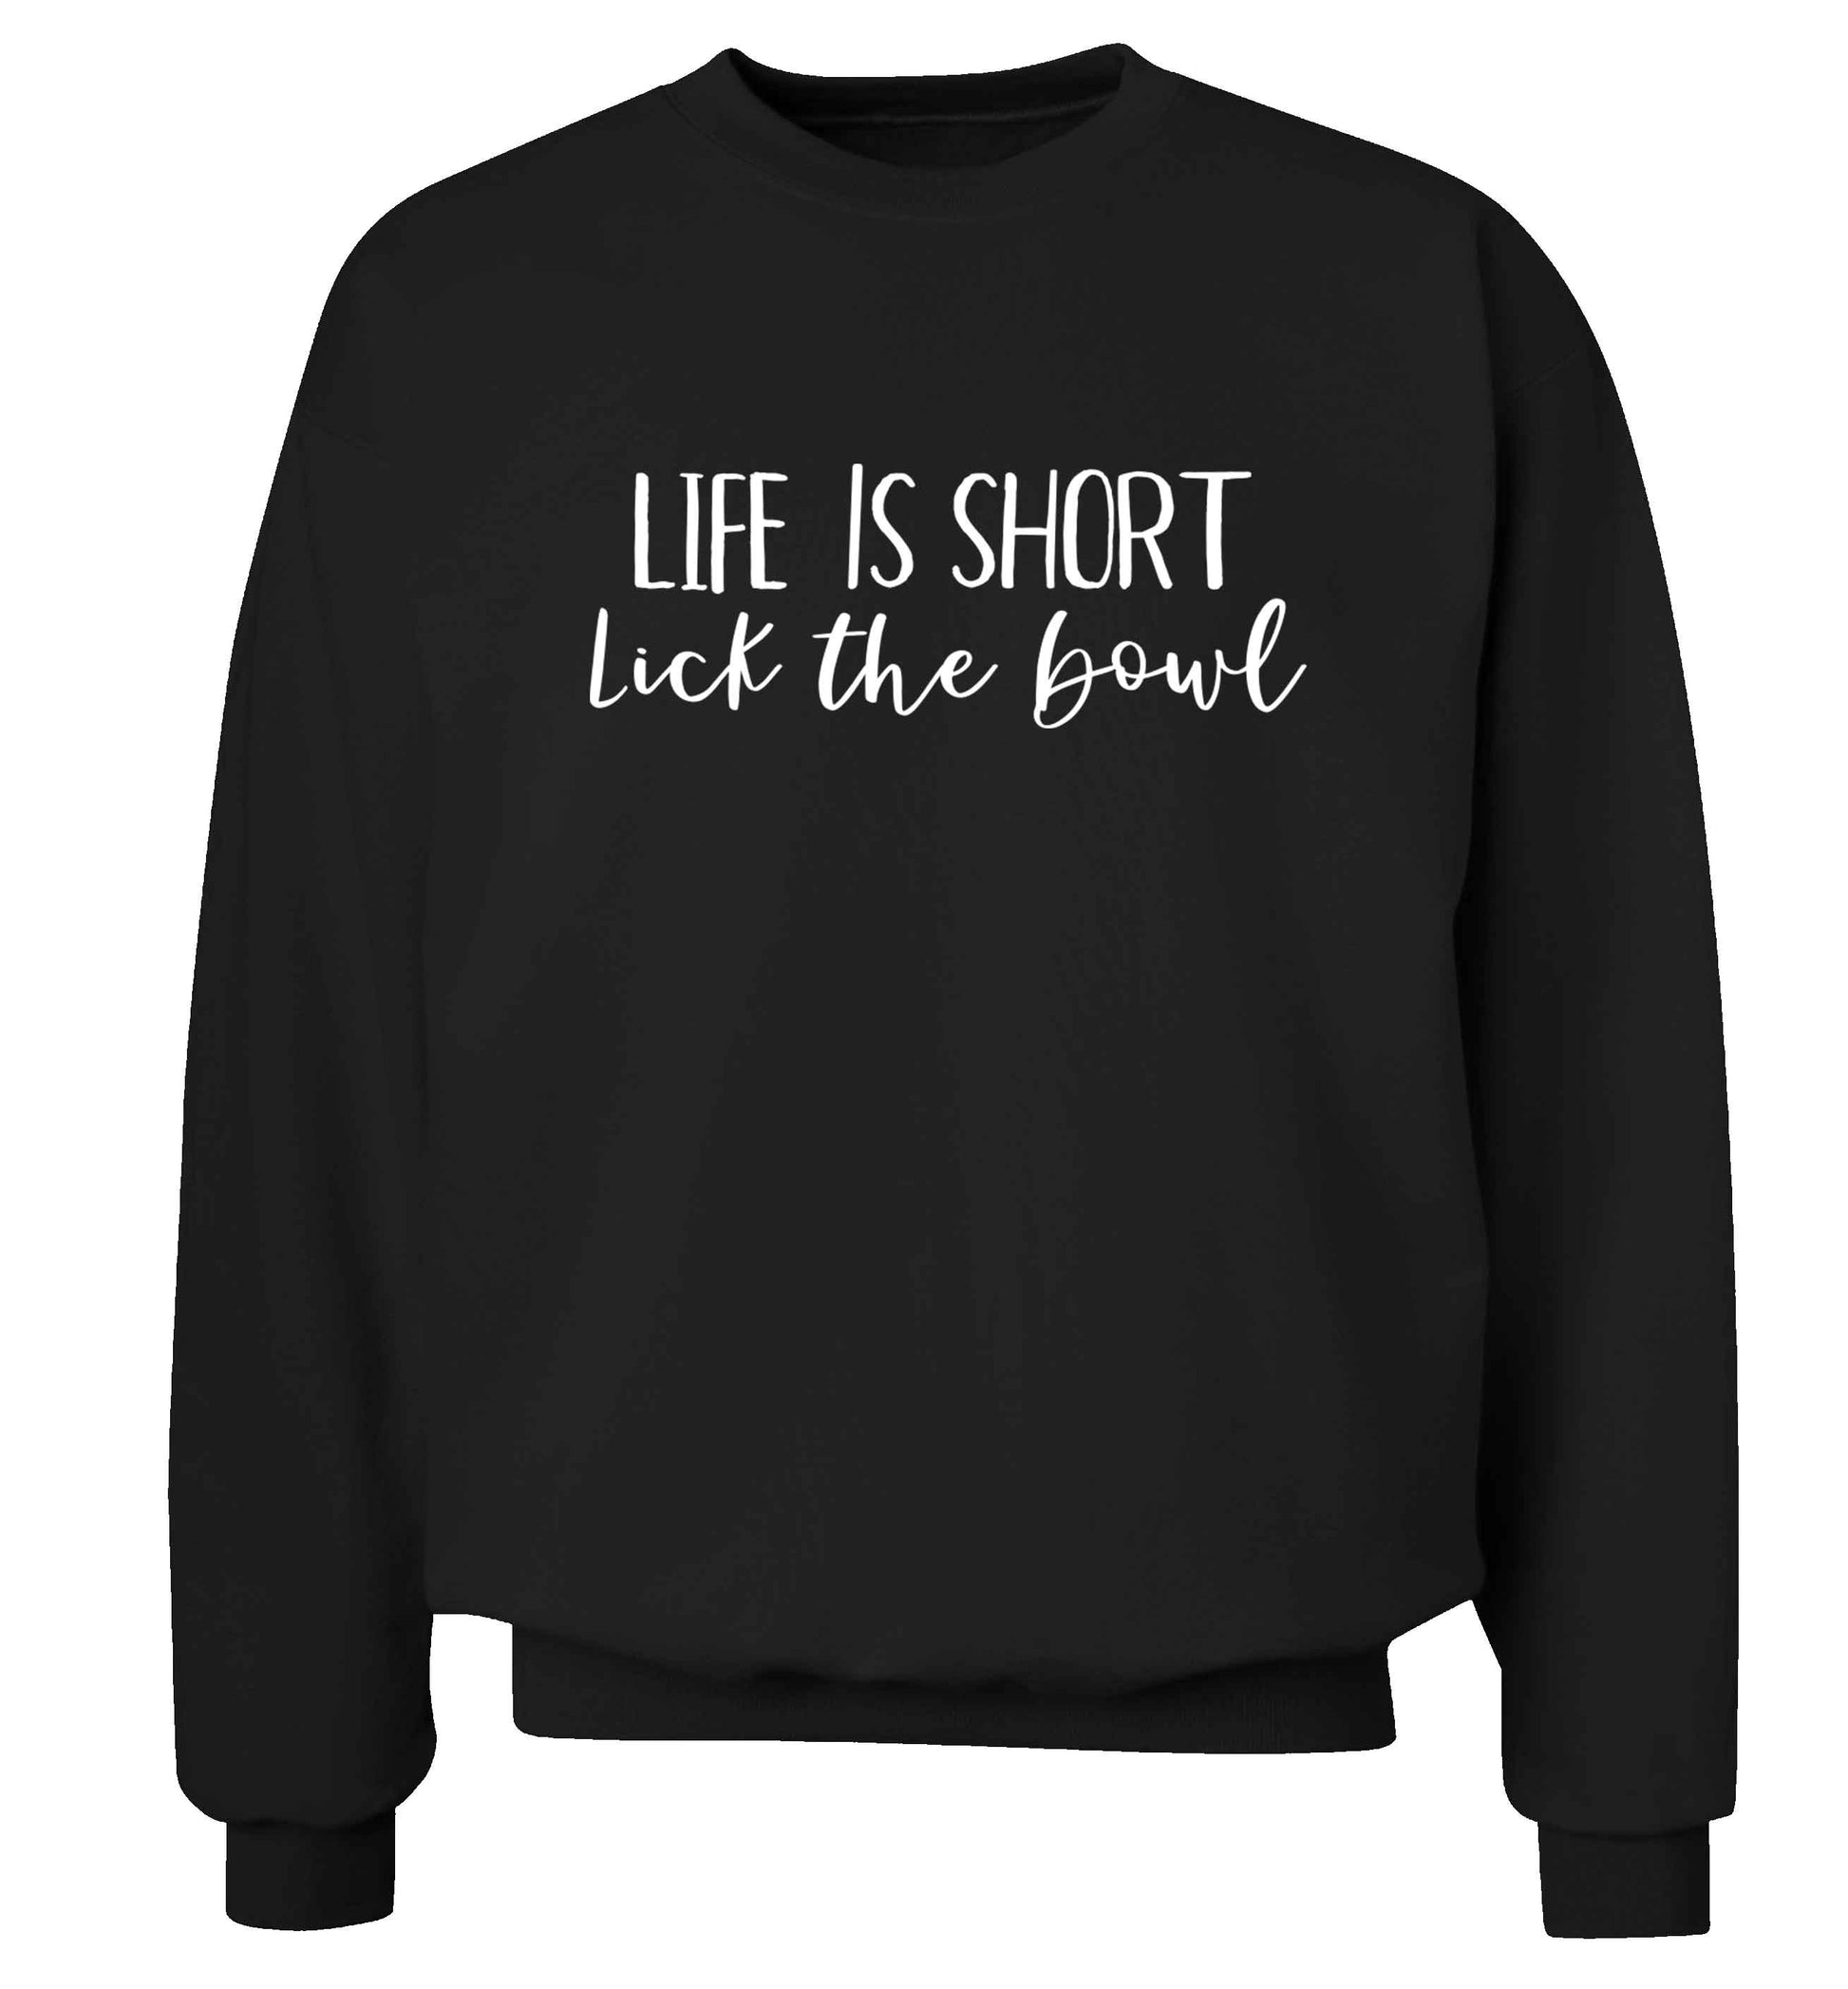 Life is short lick the bowl Adult's unisex black Sweater 2XL